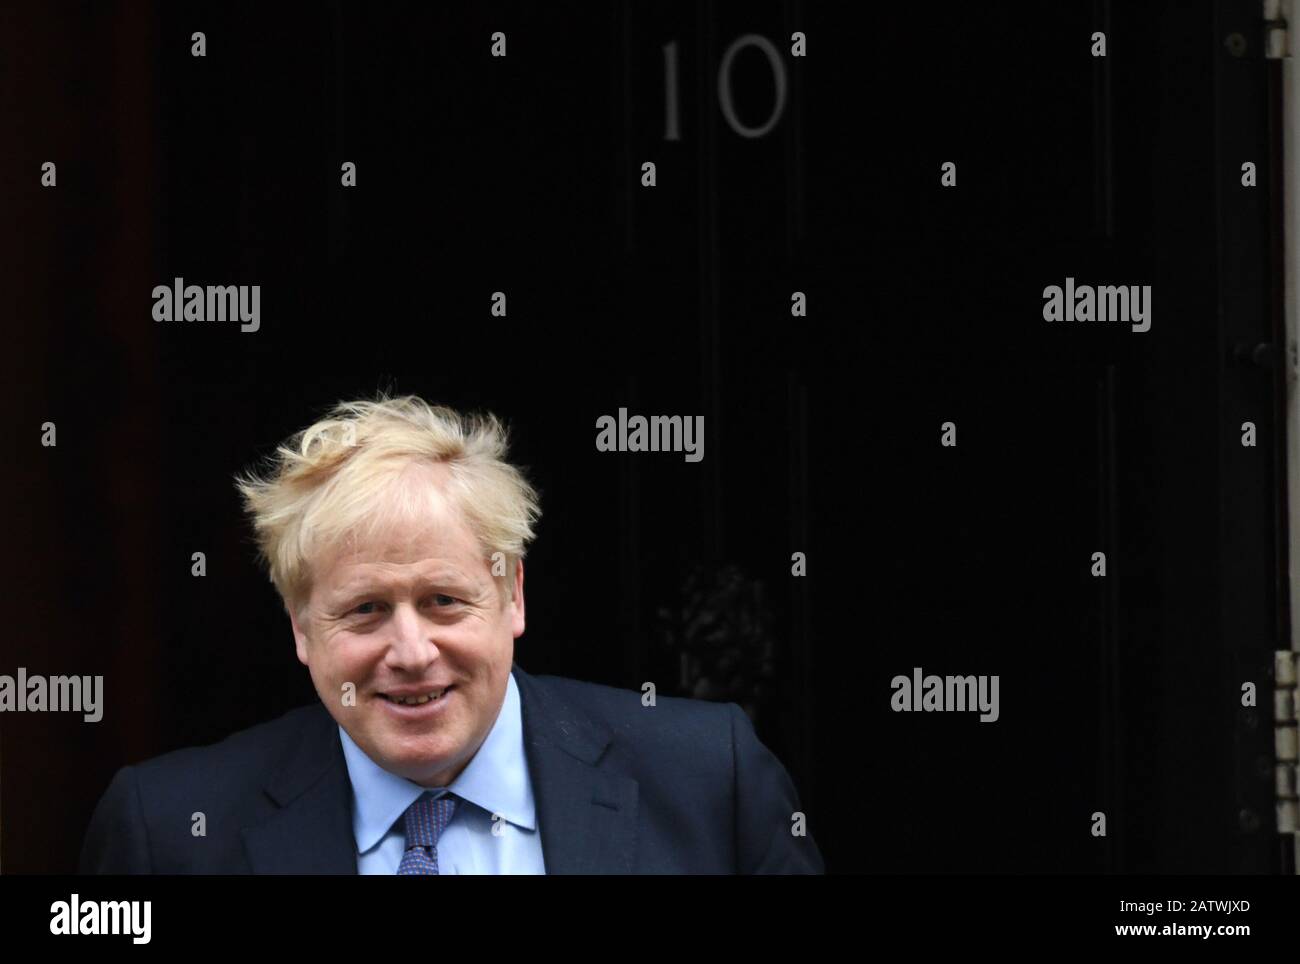 Prime Minister Boris Johnson leaves 10 Downing Street, London, for the House of Commons for Prime Minister's Questions. PA Photo. Picture date: Wednesday February 5, 2020. See PA story POLITICS PMQs. Photo credit should read: Stefan Rousseau/PA Wire Stock Photo